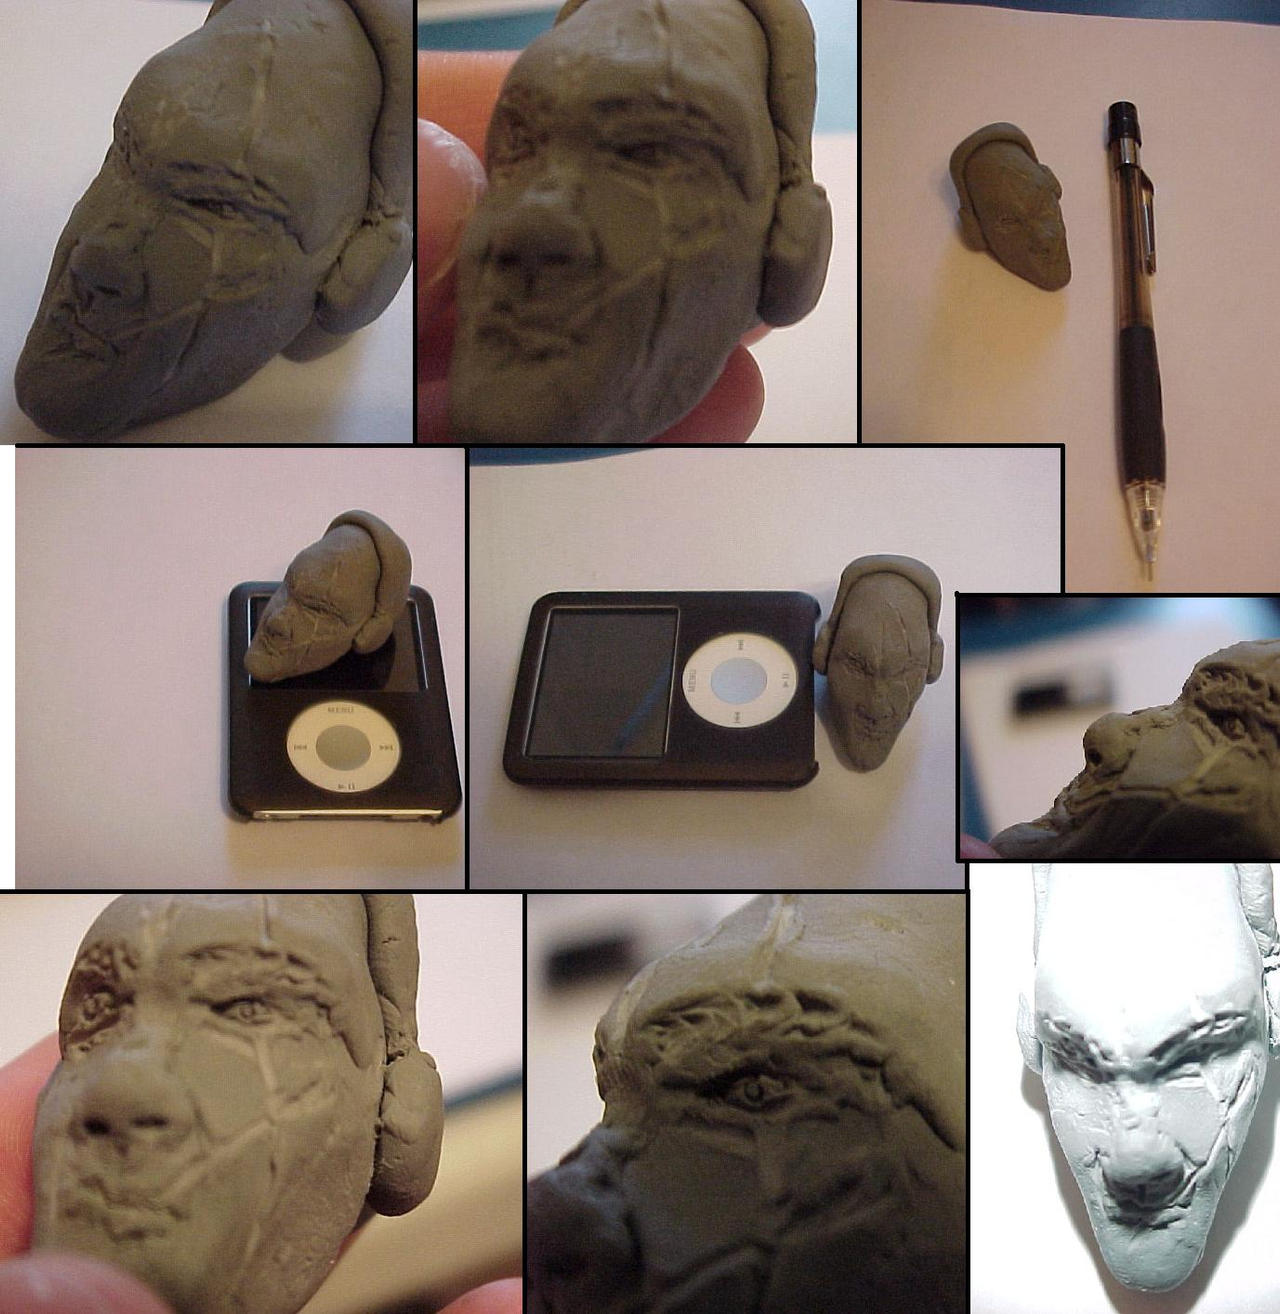 My Kneaded Eraser Is Bad! What Can I Do About It? 